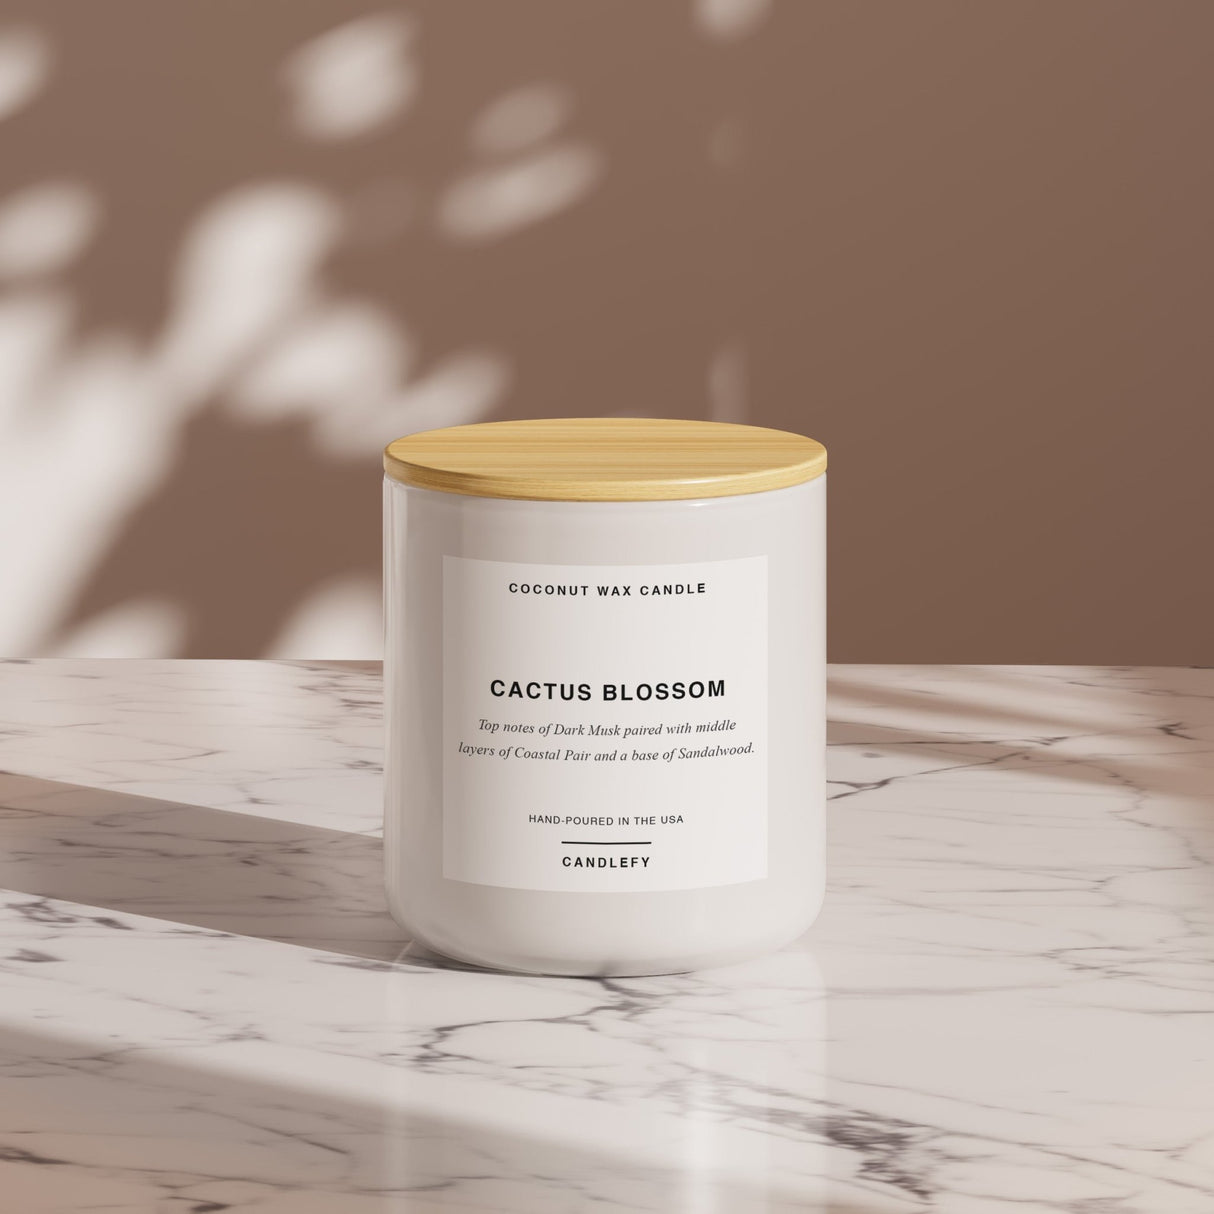 Cactus Blossom Scented Candle, Made With Natural Coconut Wax - Candlefy